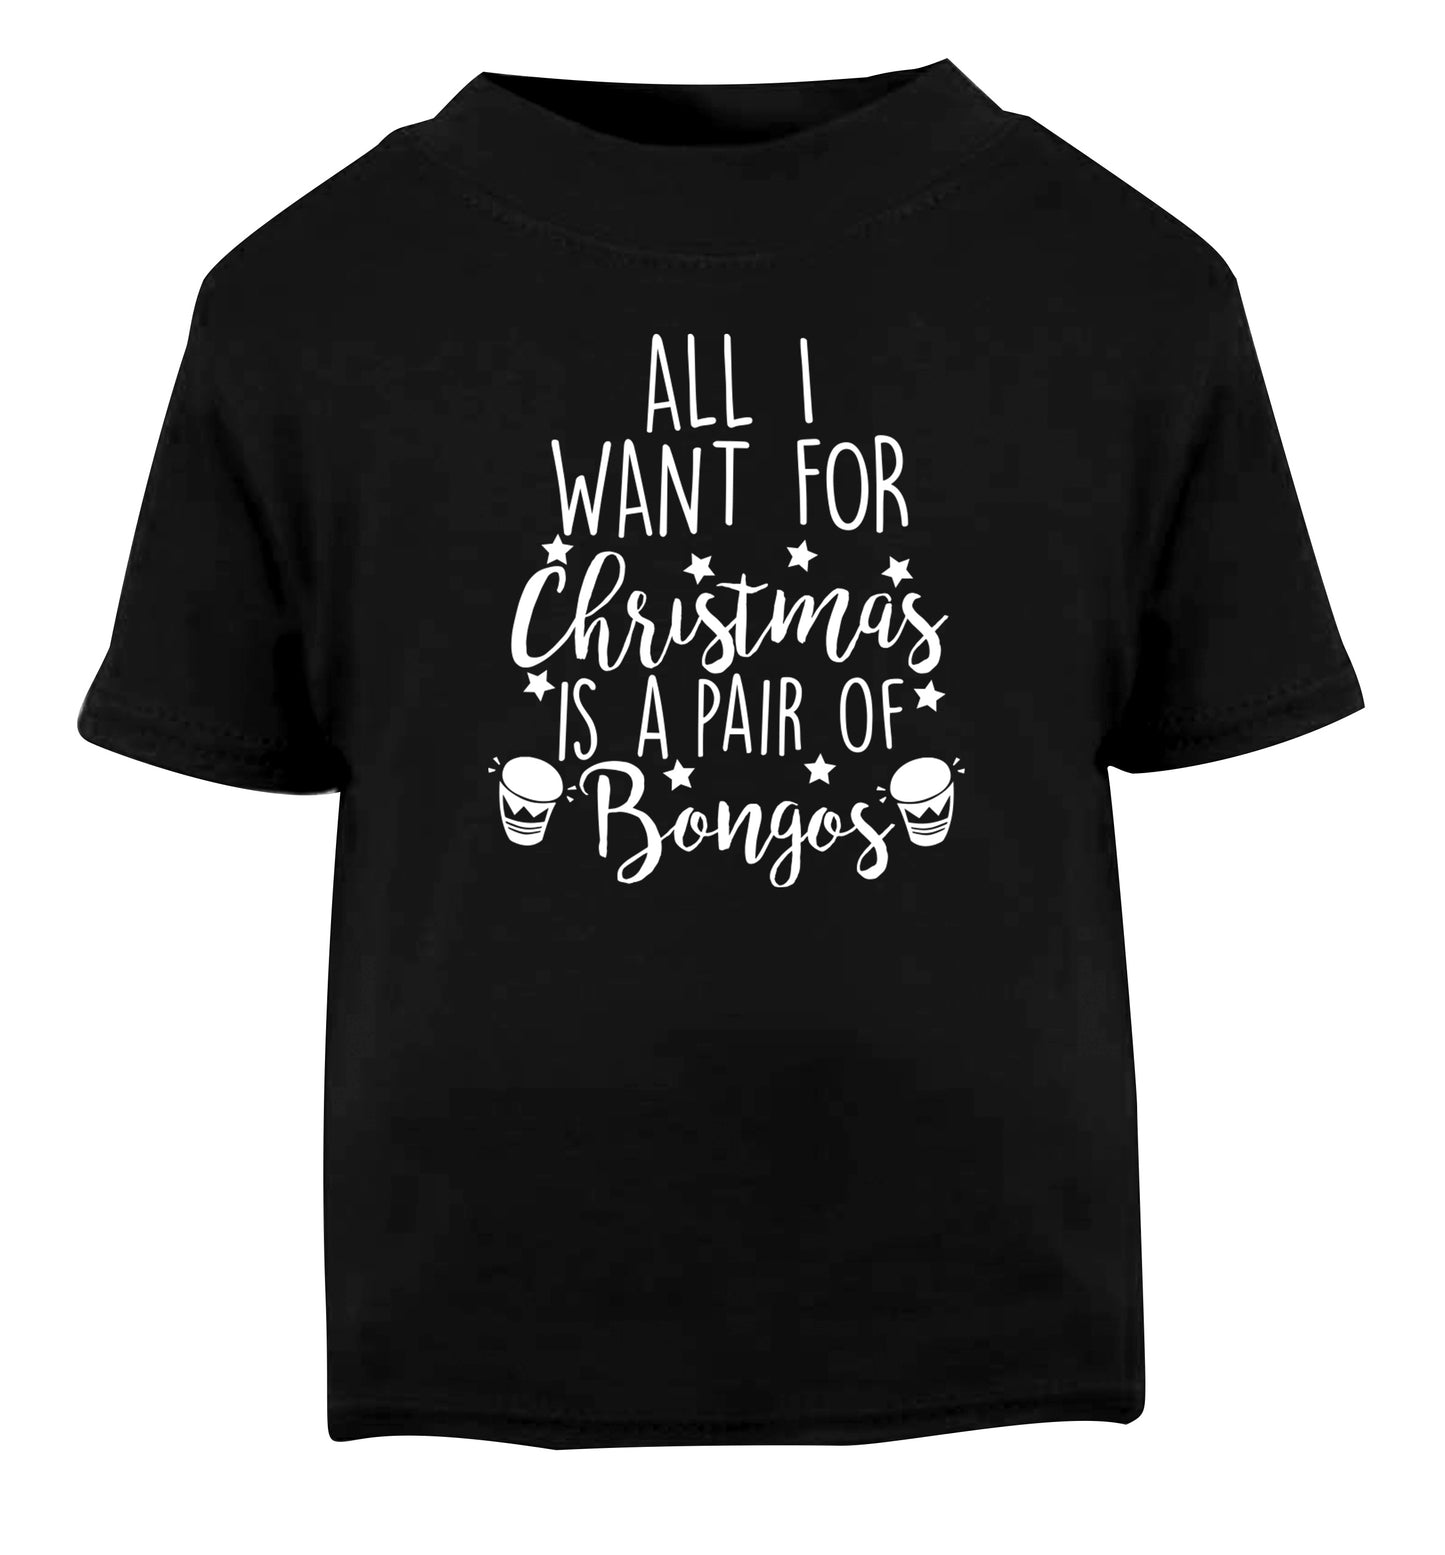 All I want for Christmas is a pair of bongos! Black Baby Toddler Tshirt 2 years